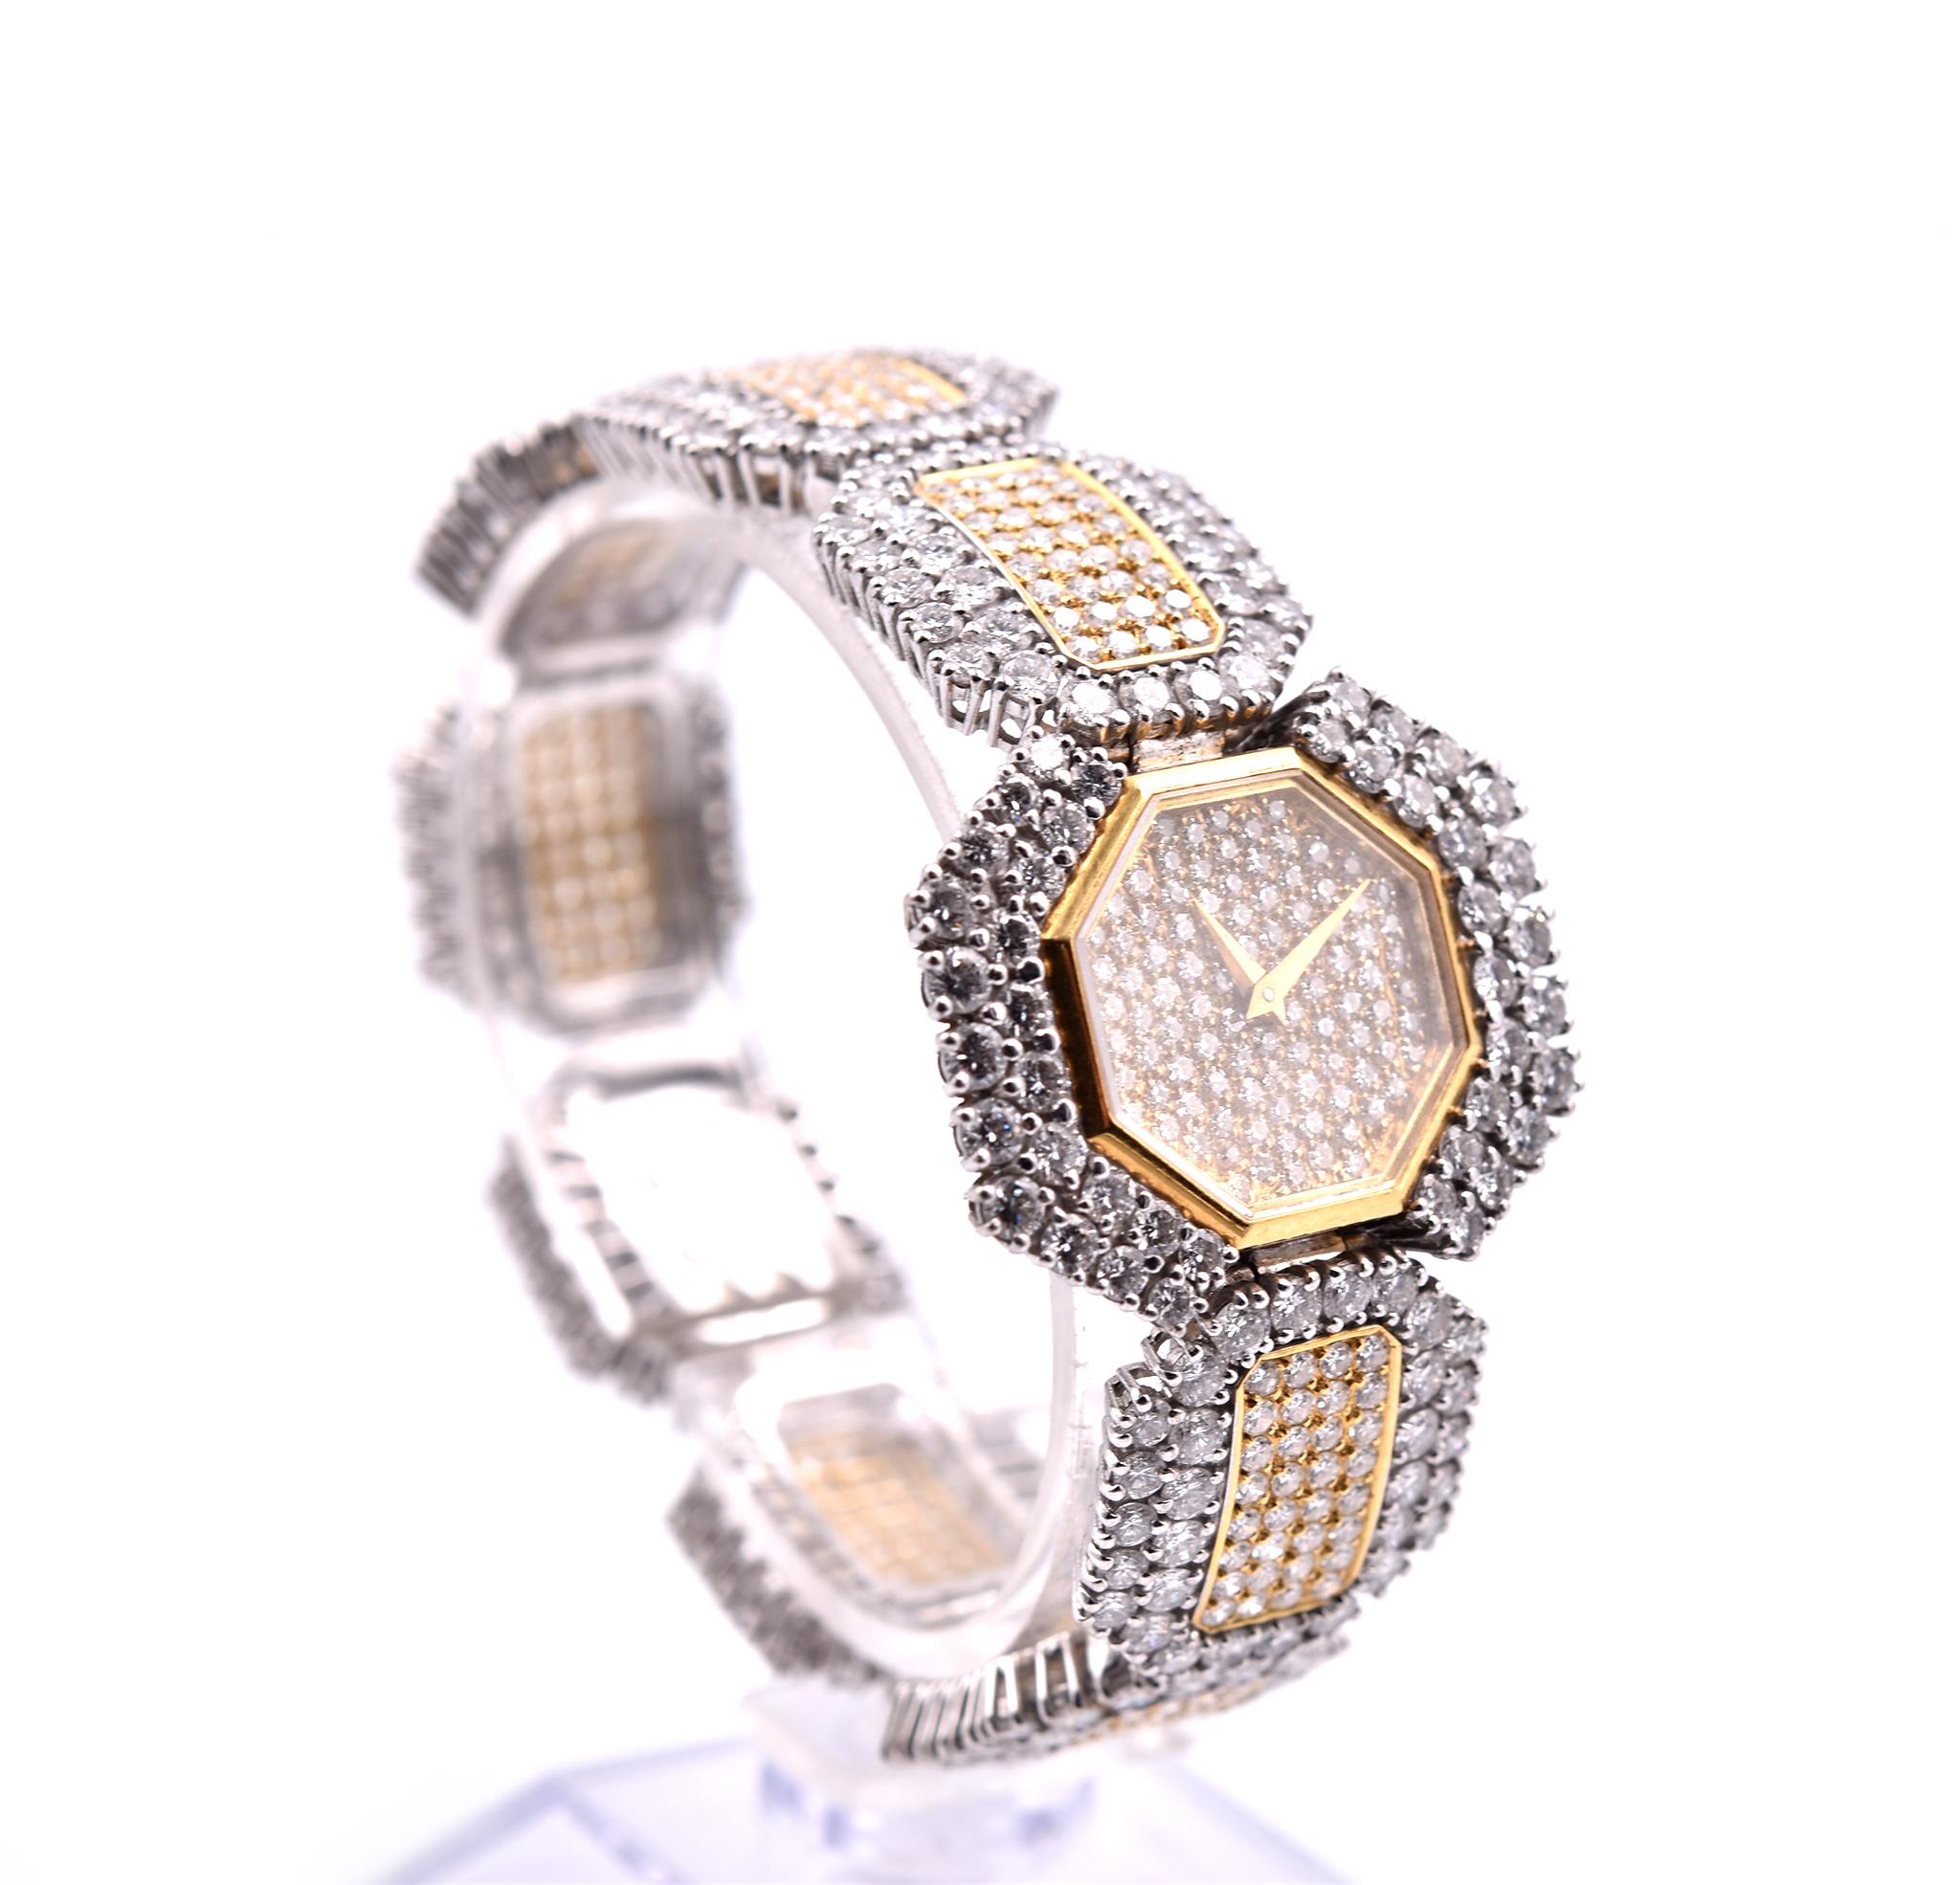 Movement: manual wind
Function: hours, minutes
Case: 30mm x 25mm 18k yellow gold and white gold case with white and yellow diamonds
Dial: yellow gold diamond encrusted dial with gold hands
Band: 18k yellow gold and white gold diamond encrusted with